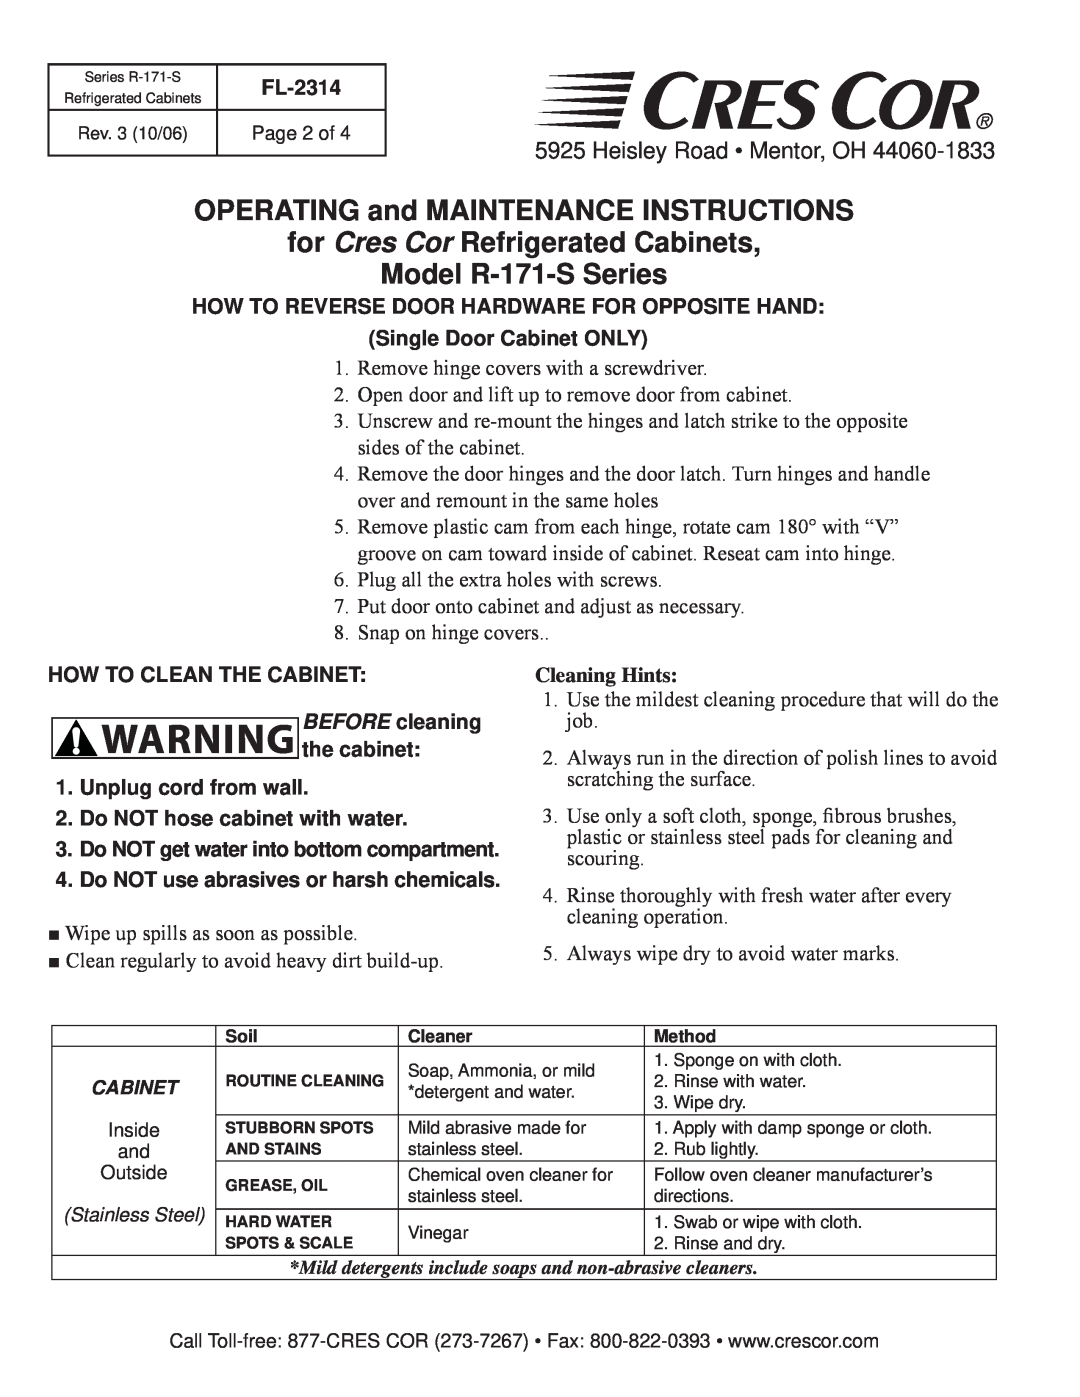 Cres Cor R171S1856240 manual Cleaning Hints, OPERATING and MAINTENANCE INSTRUCTIONS, for Cres Cor Refrigerated Cabinets 